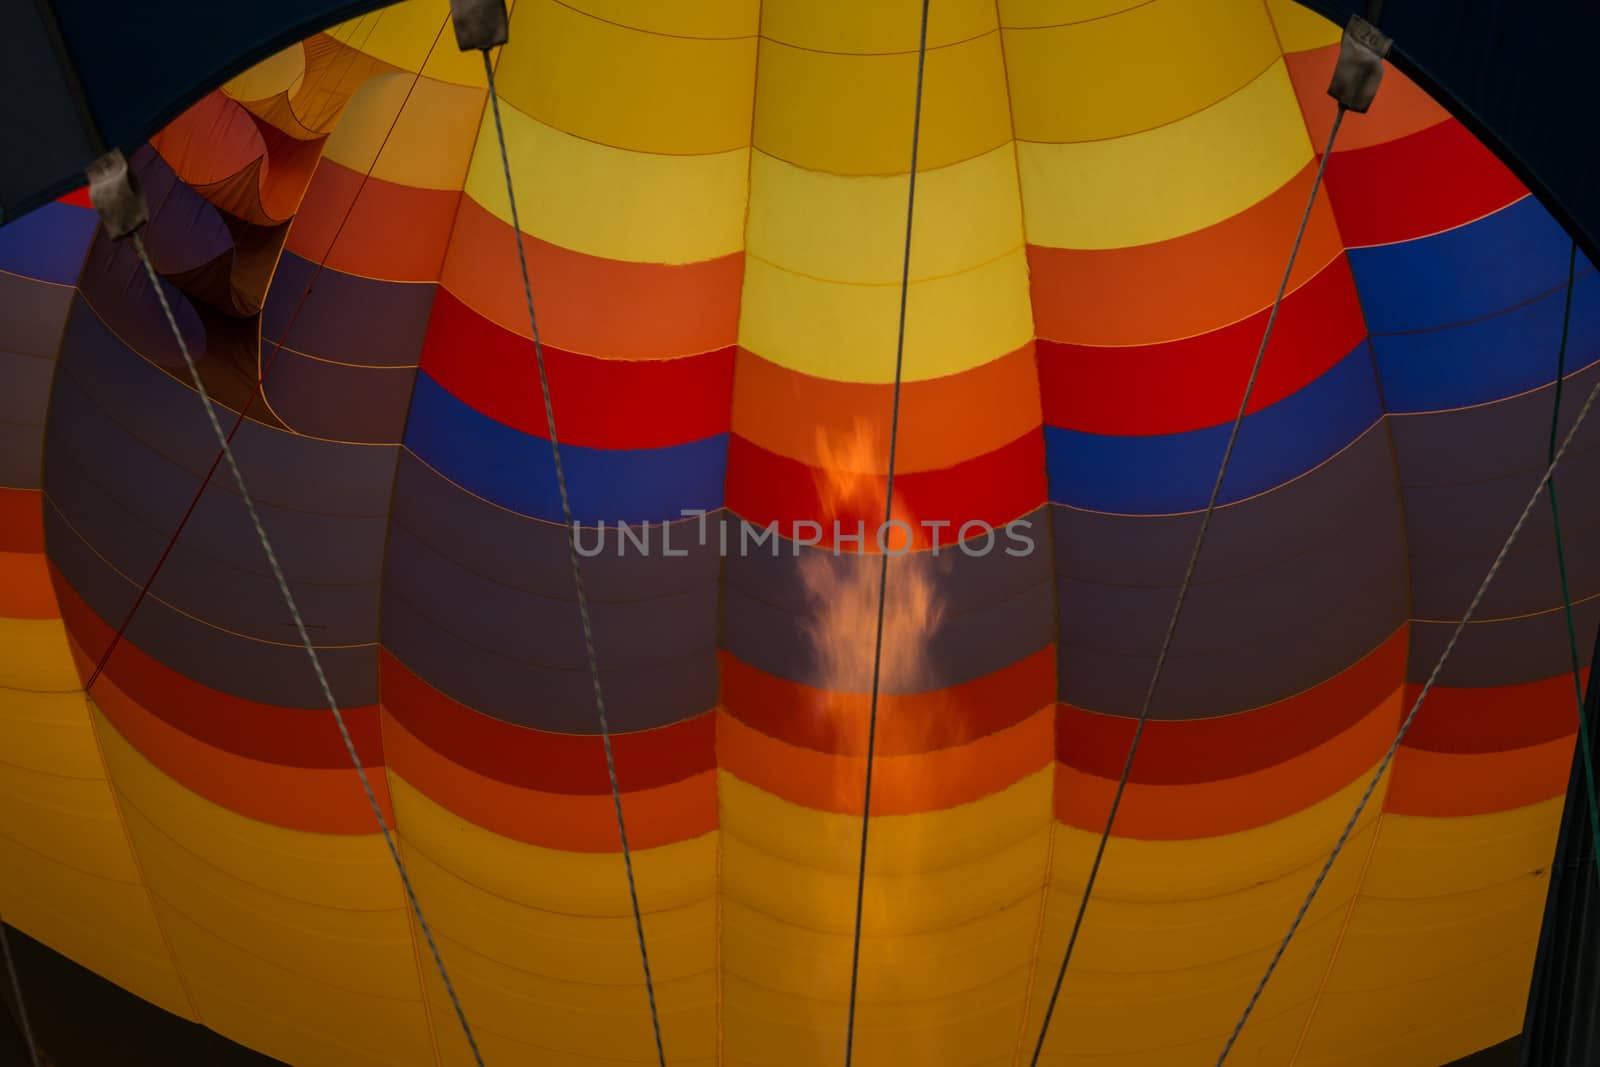 2013 Temecula Balloon and Wine Festival by cvalle